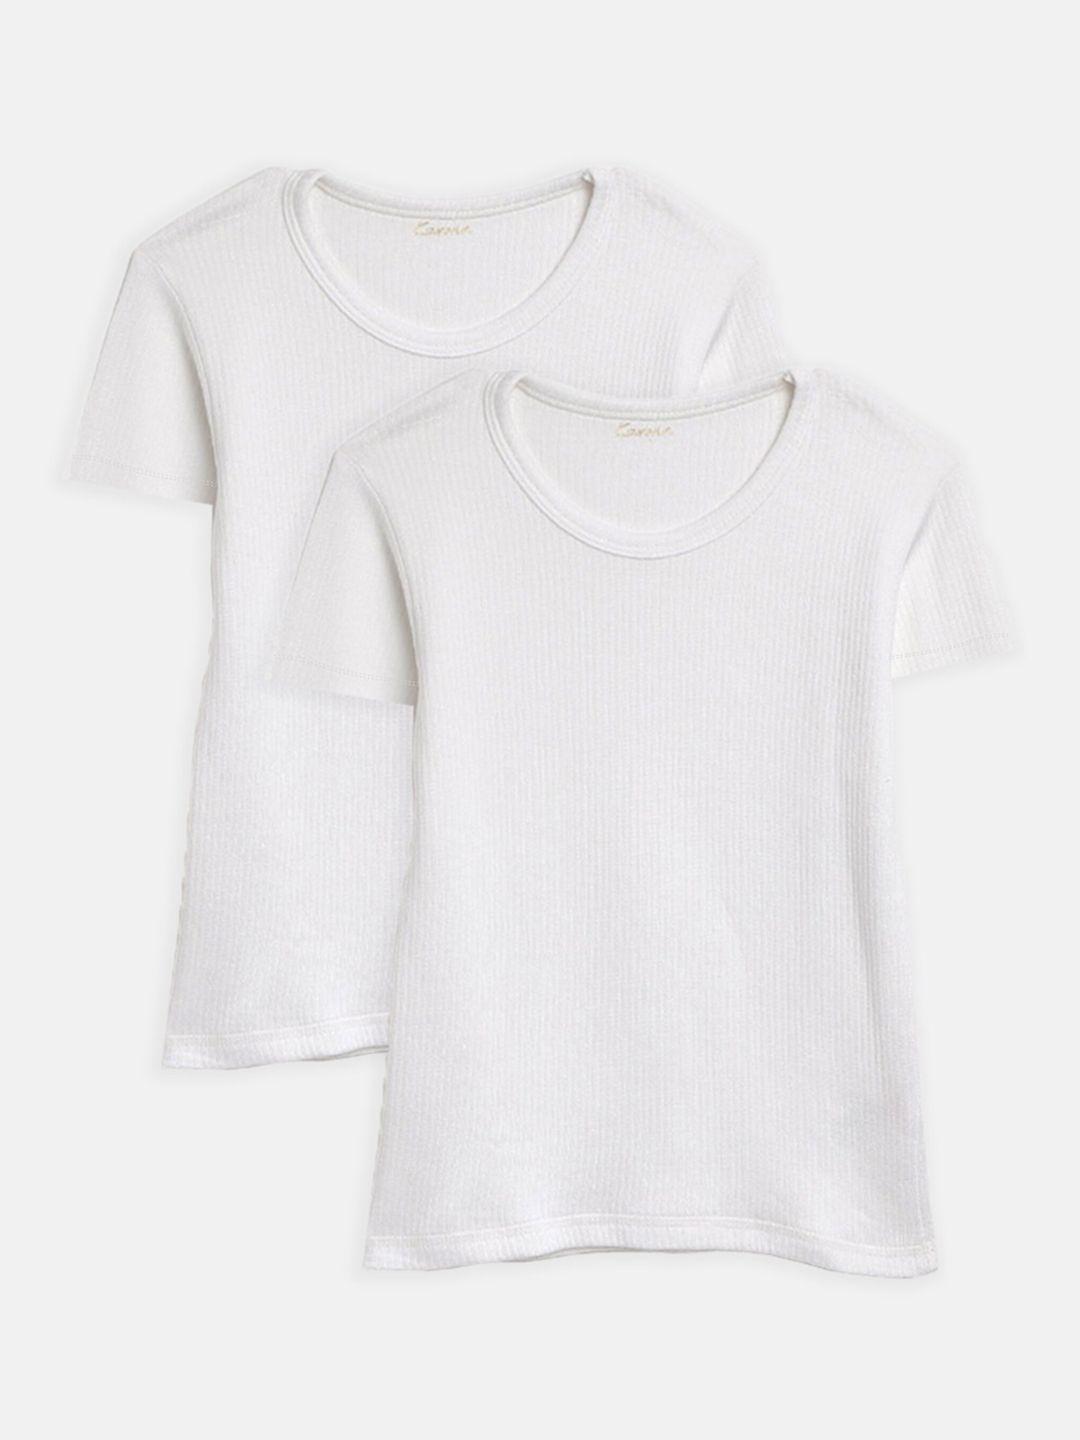 kanvin boys pack of 2 white solid thermal t-shirts